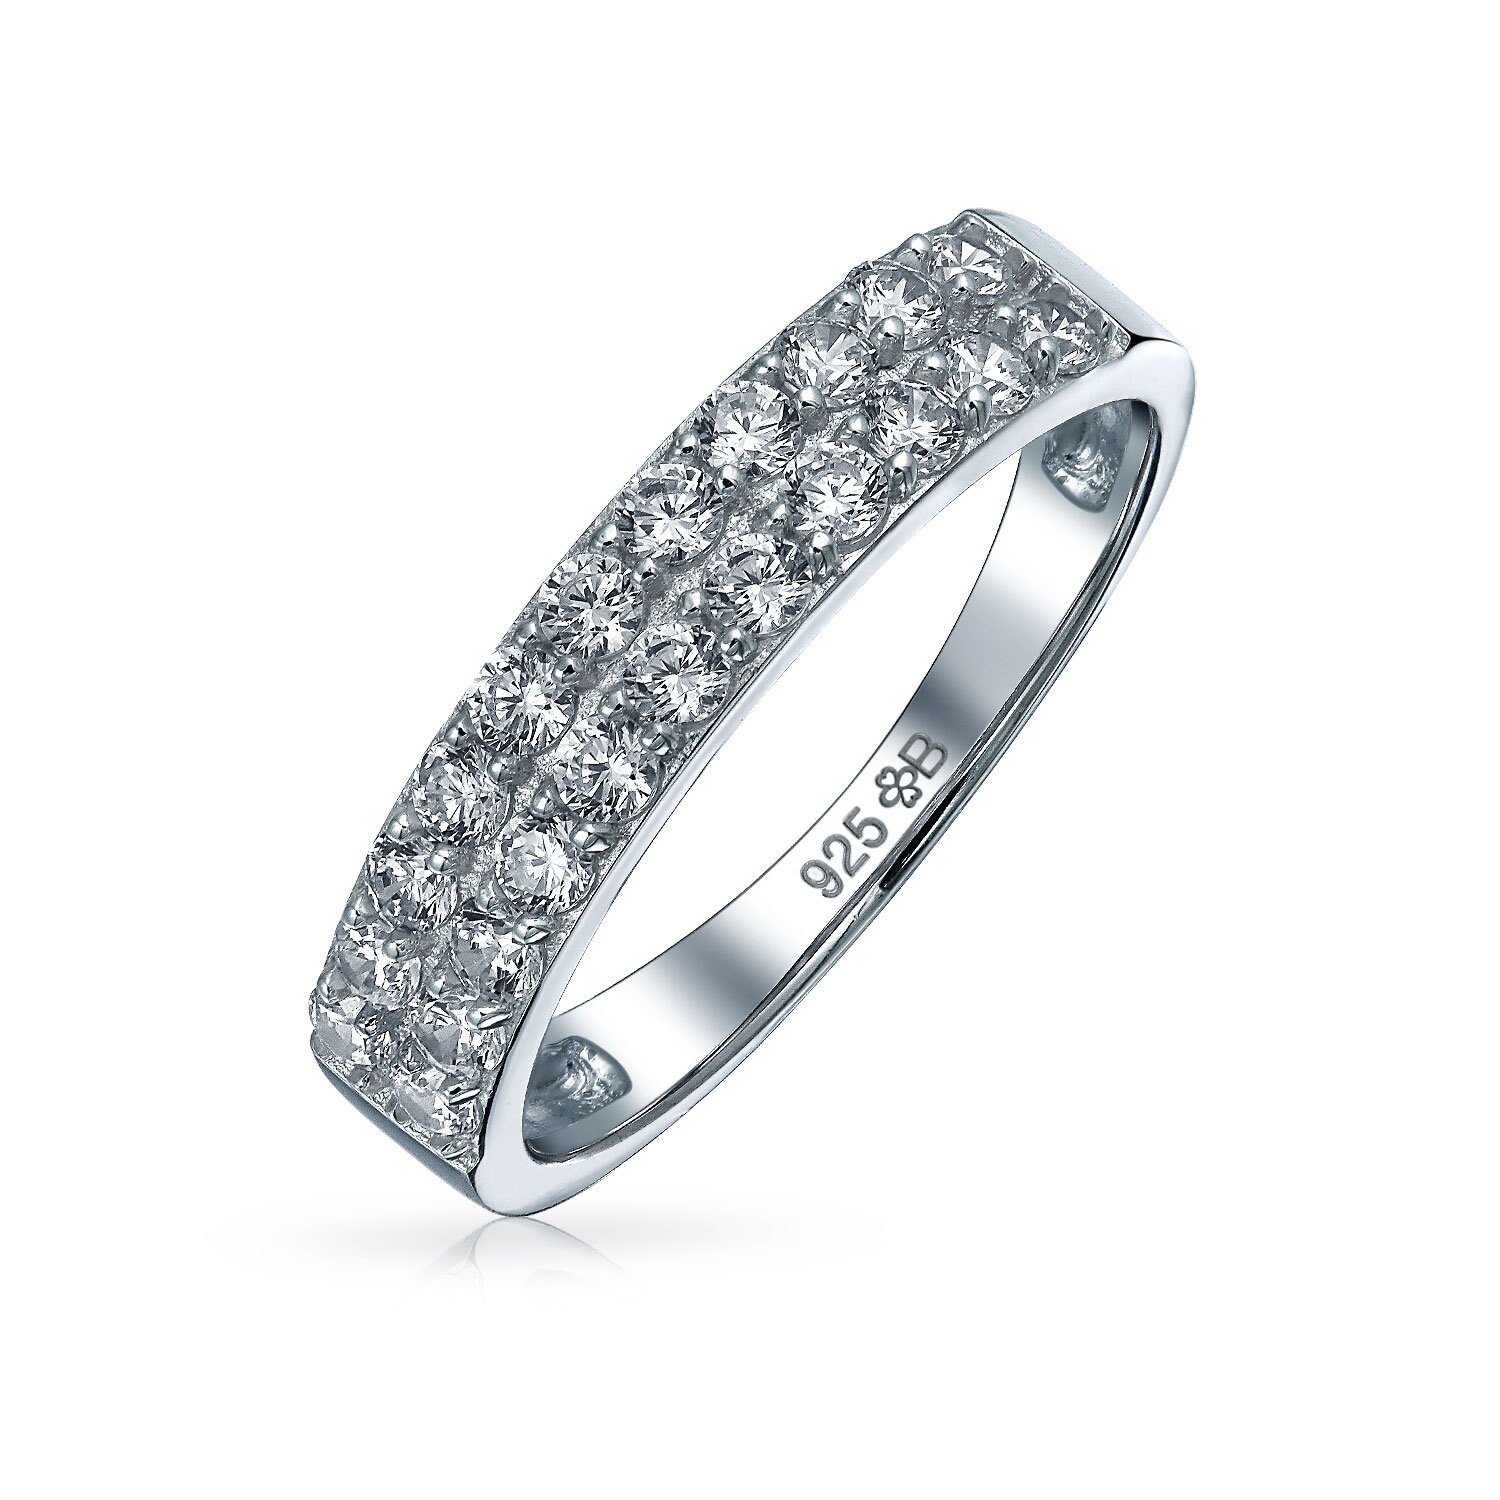 Sterling Silver .925 Bridal Cubic Zirconia CZ 2 Row Pave Eternity Wedding Band Ring Size 4-10 